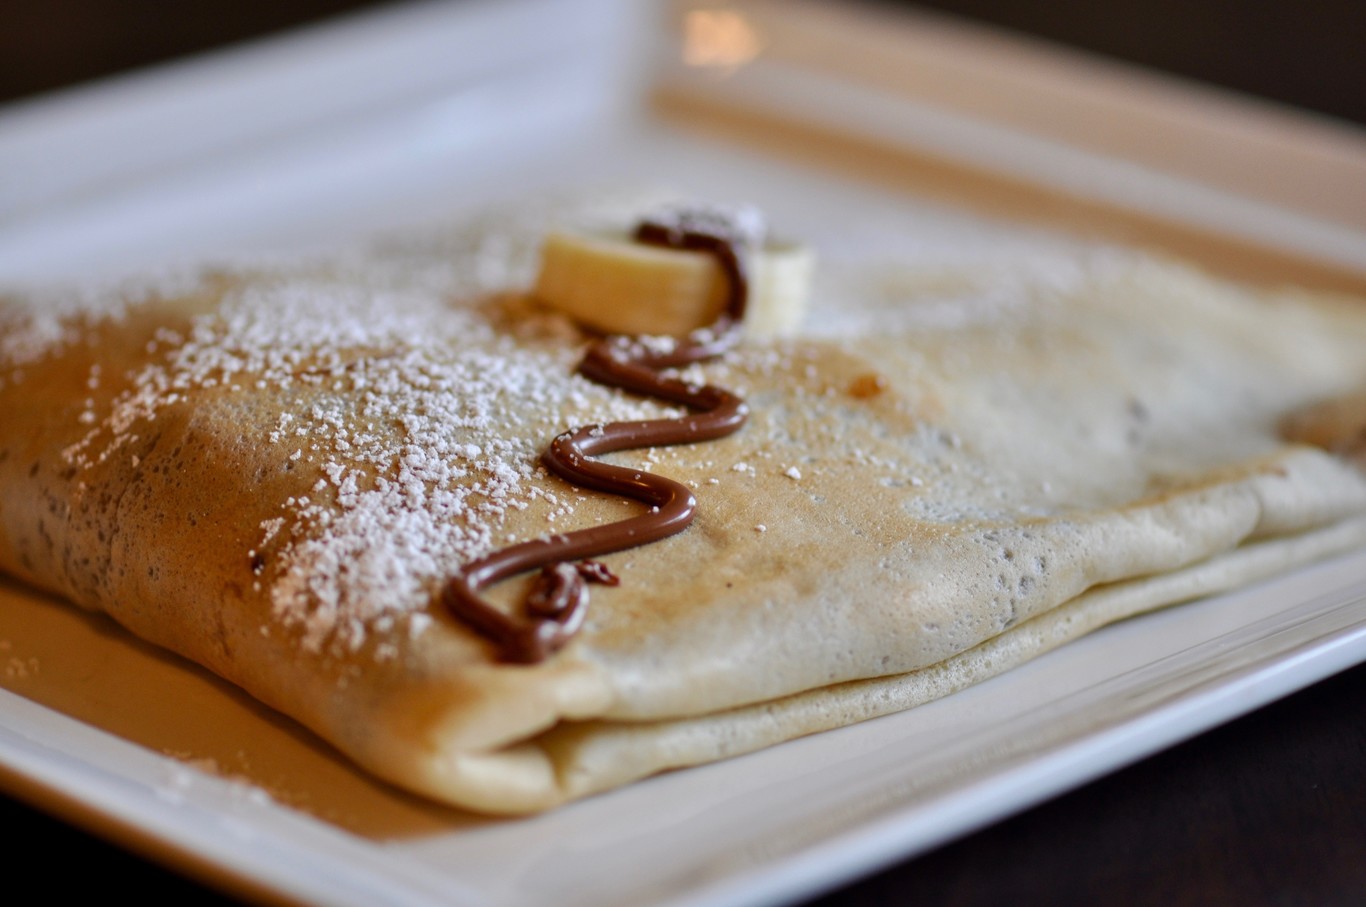 Grilled crepes with dulce de leche or Nutella